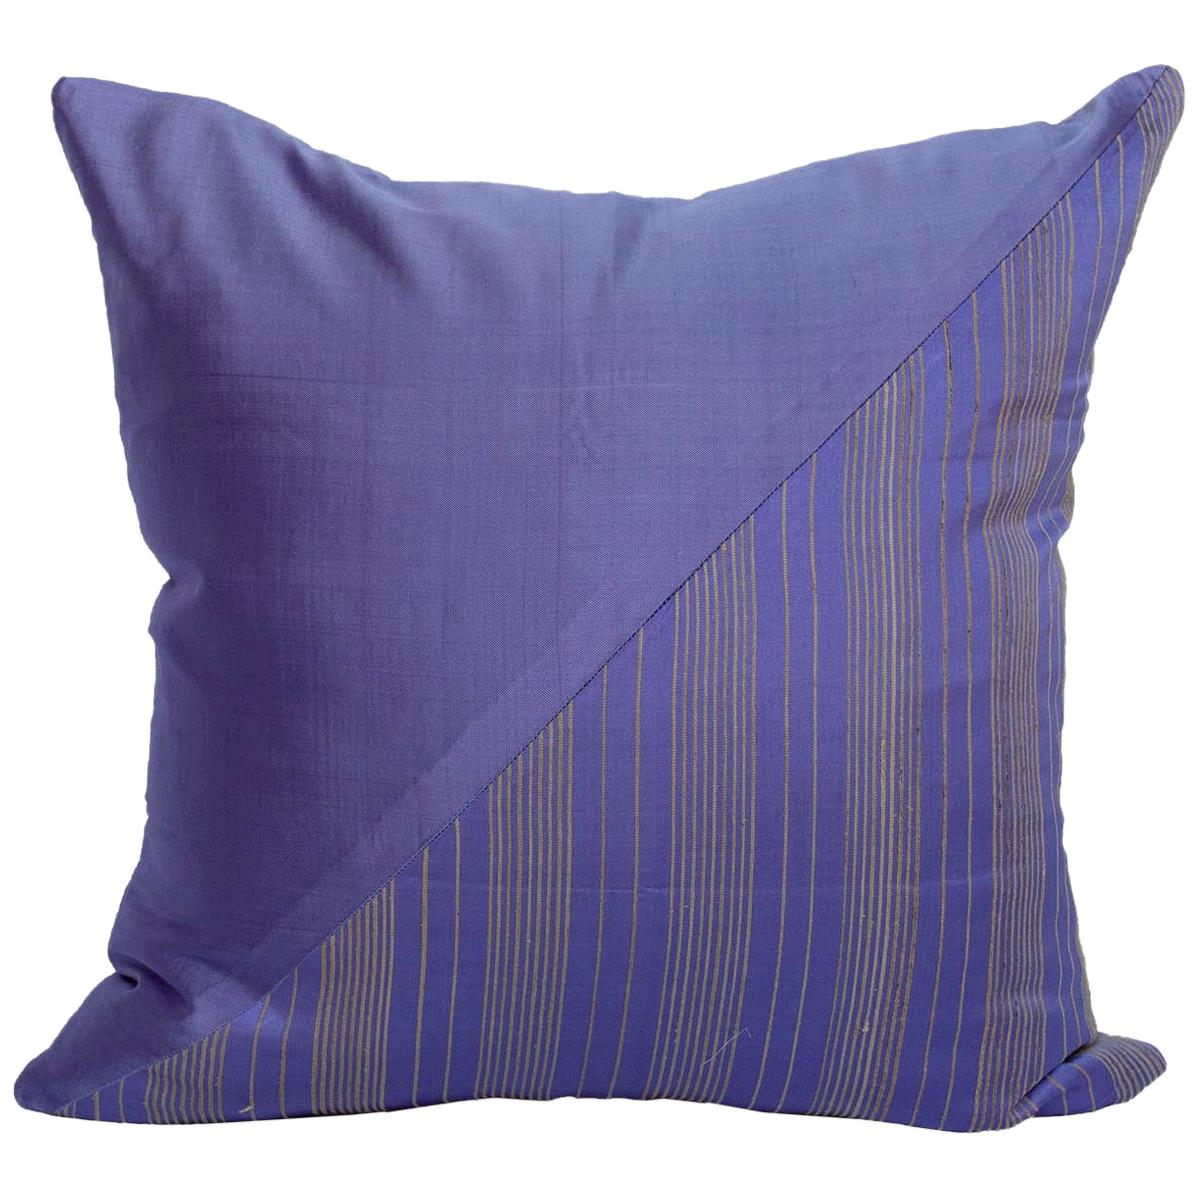 Lotus Flower and Silk Pillow from Myanmar, Purple